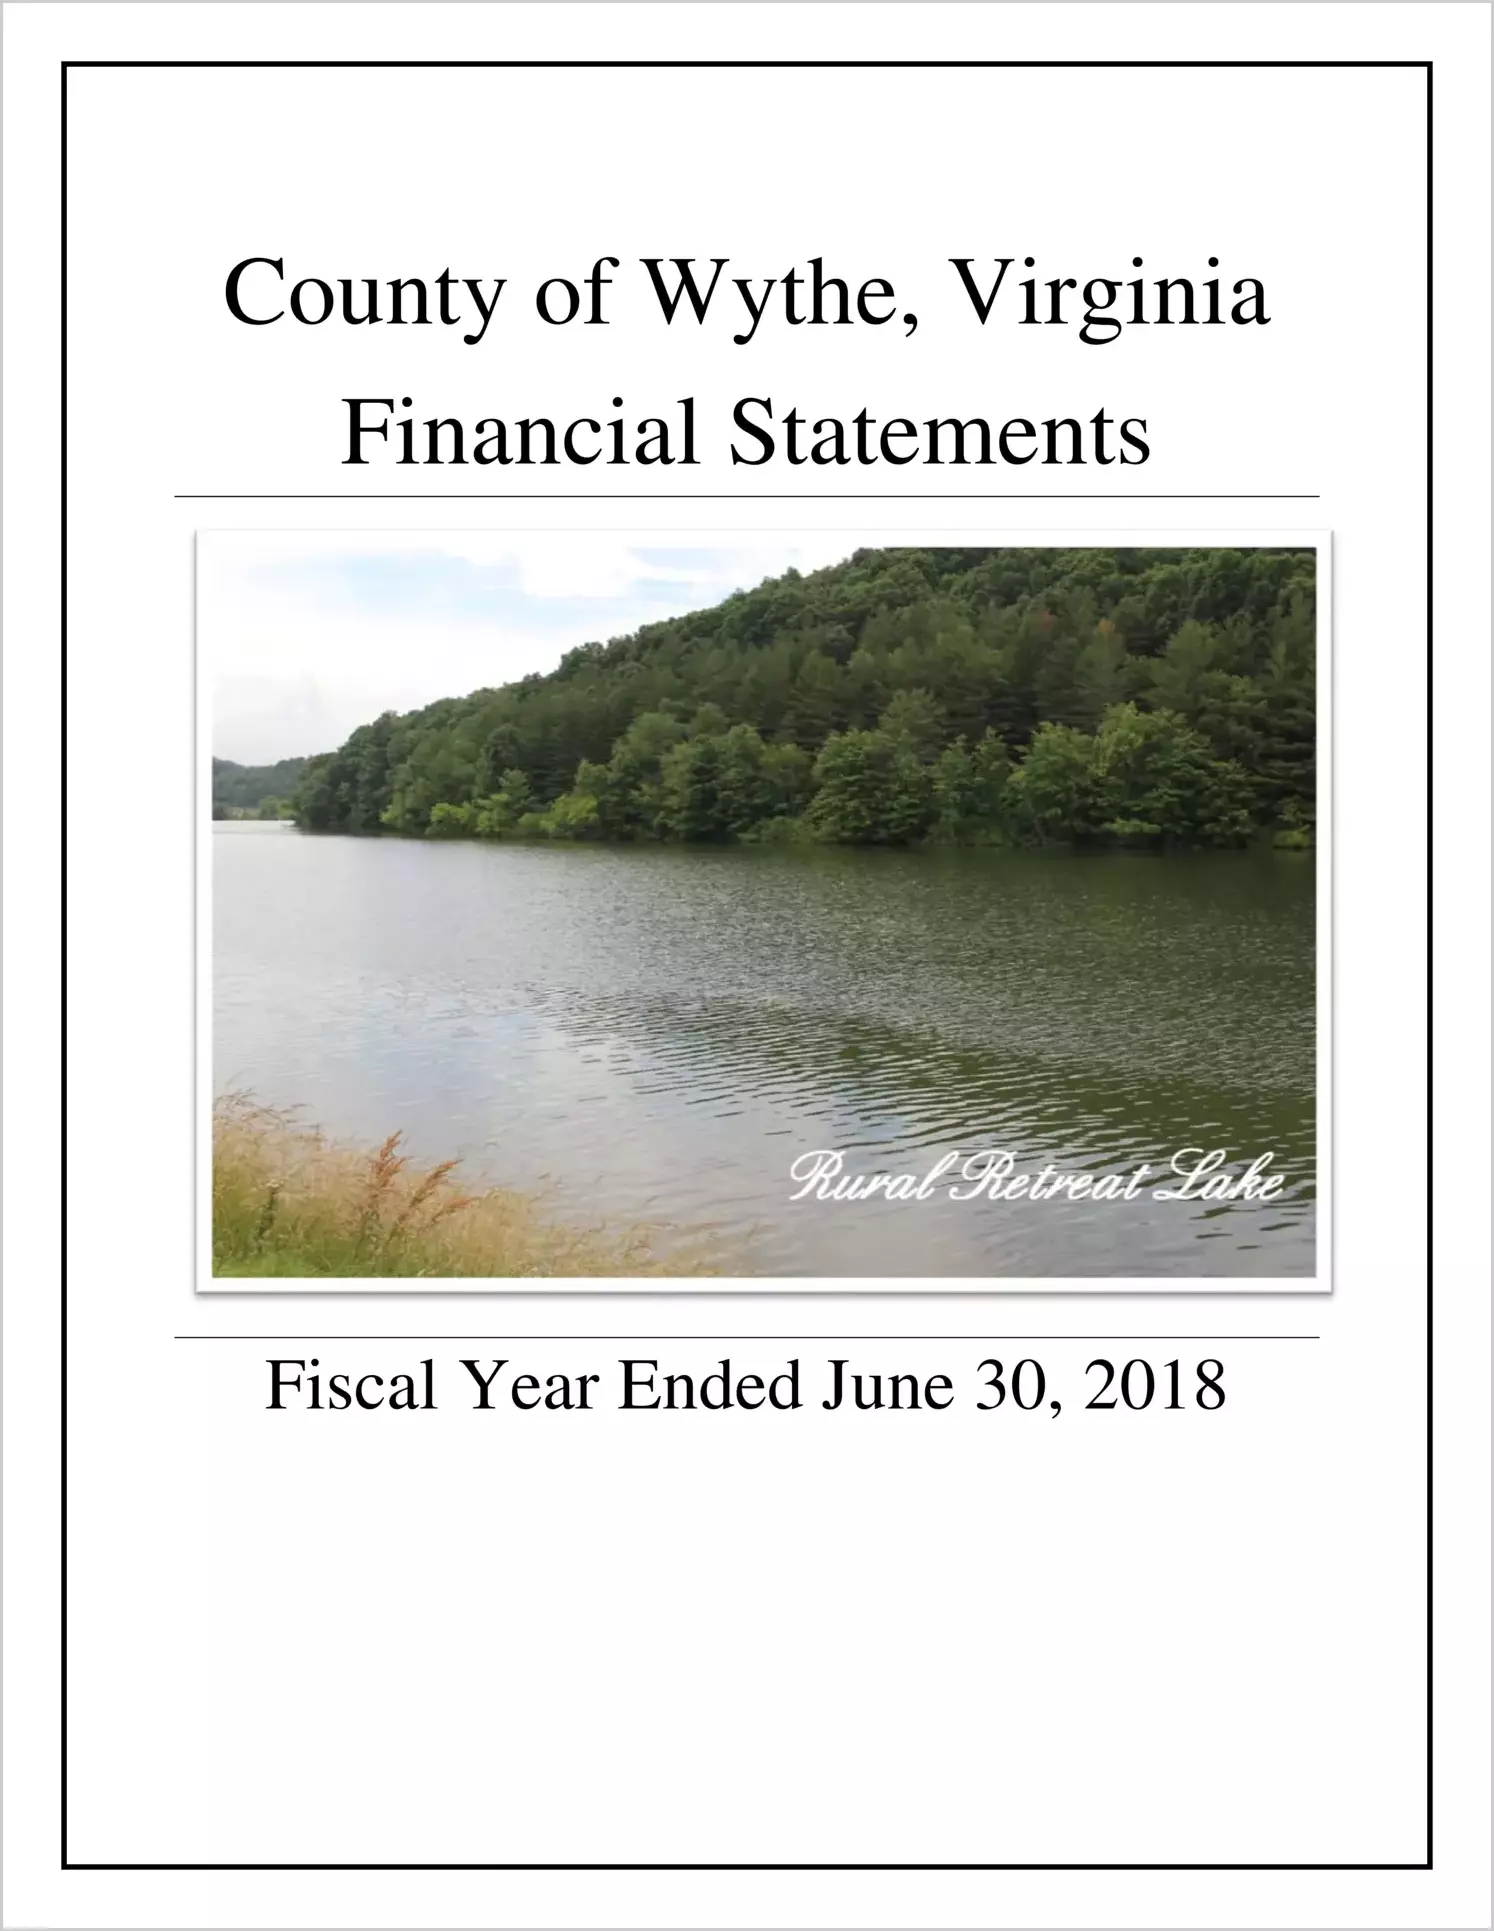 2018 Annual Financial Report for County of Wythe